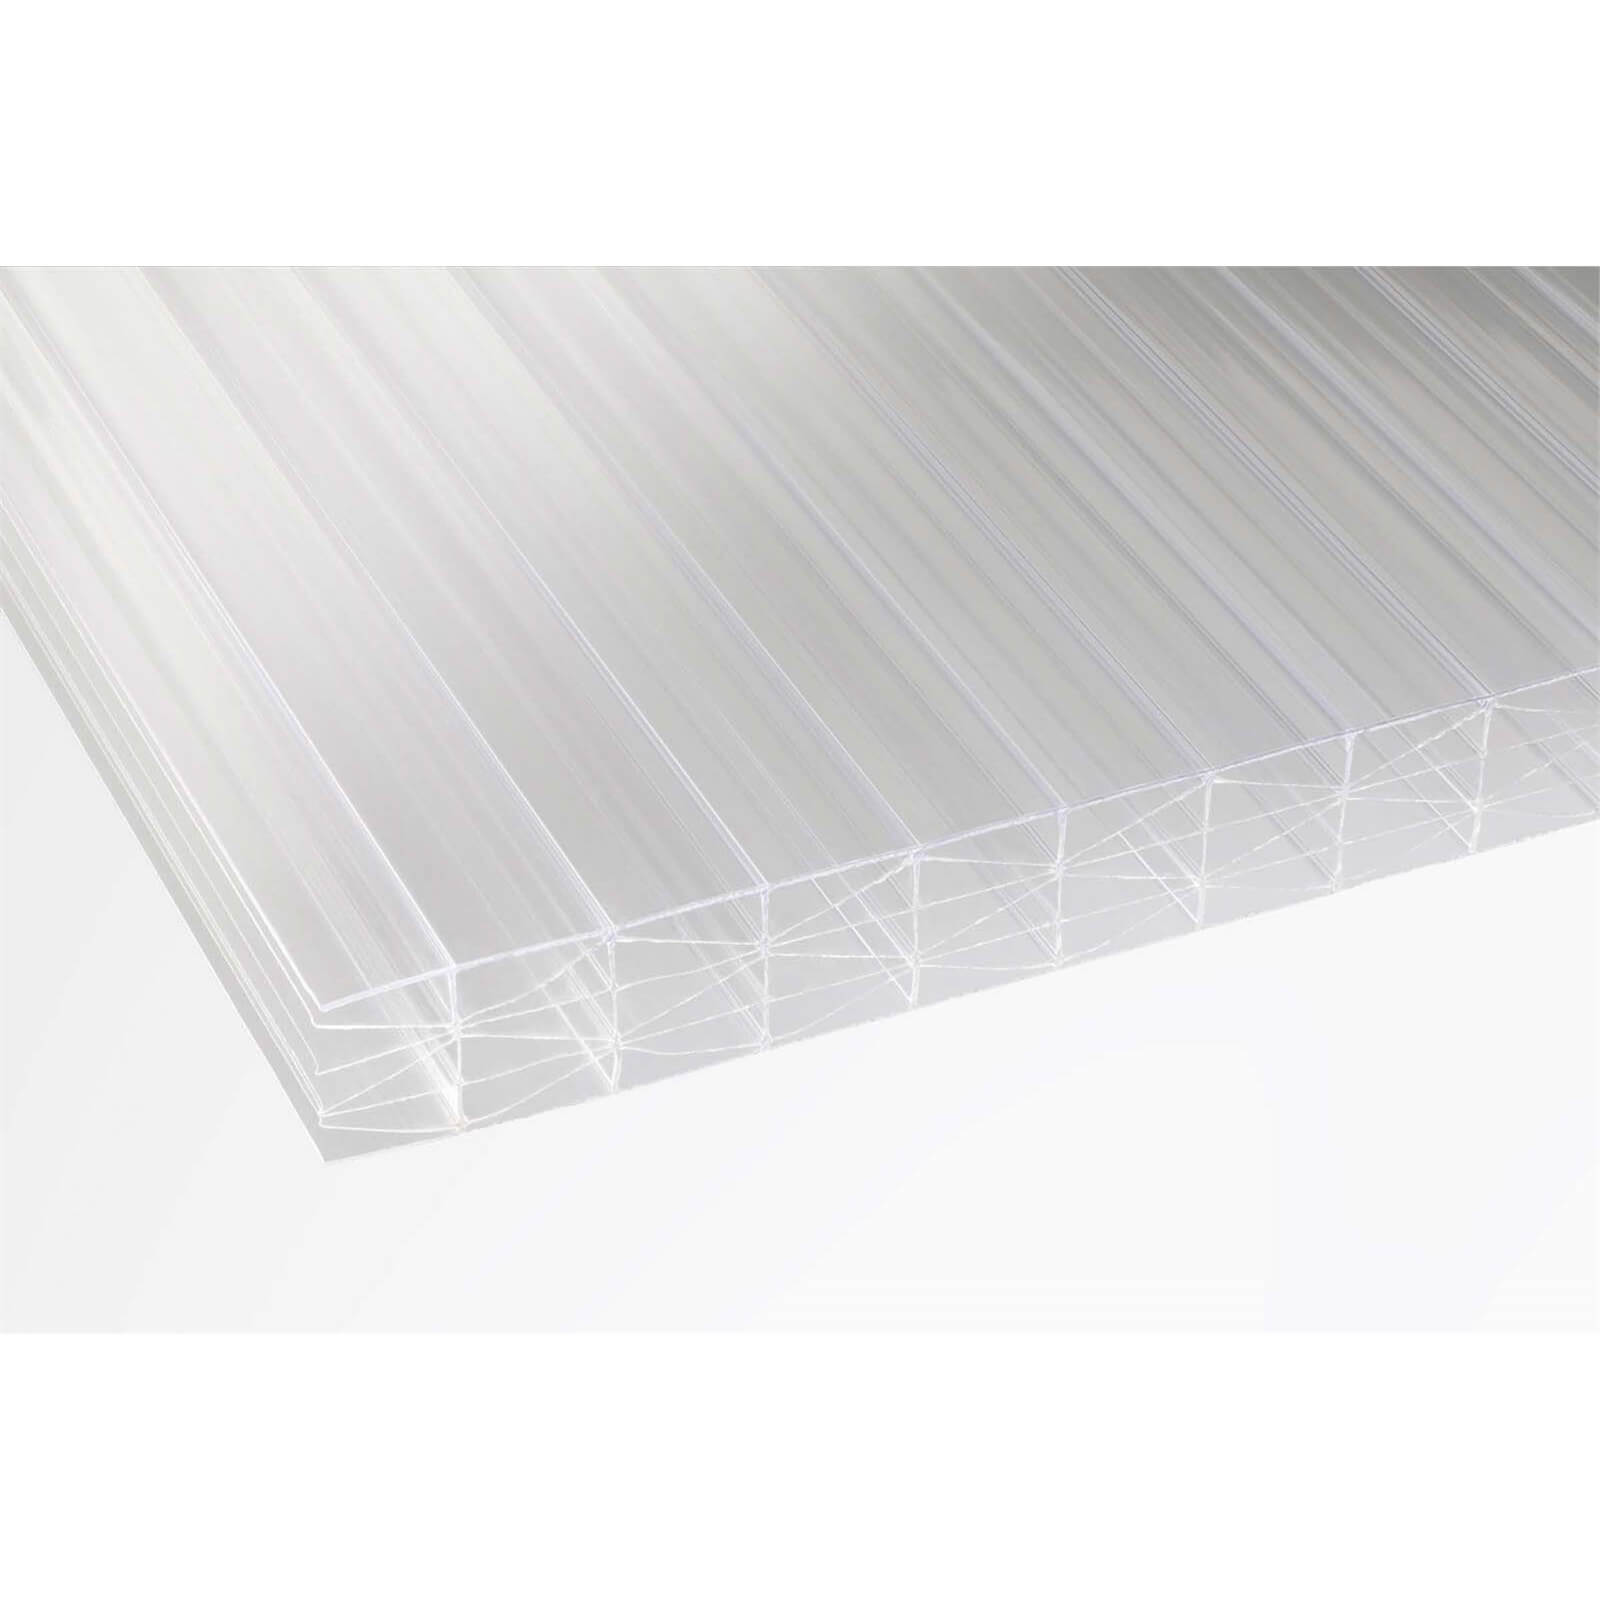 Photo of Corotherm Clear Roof Sheet 2500x1050x25mm - Pack 5